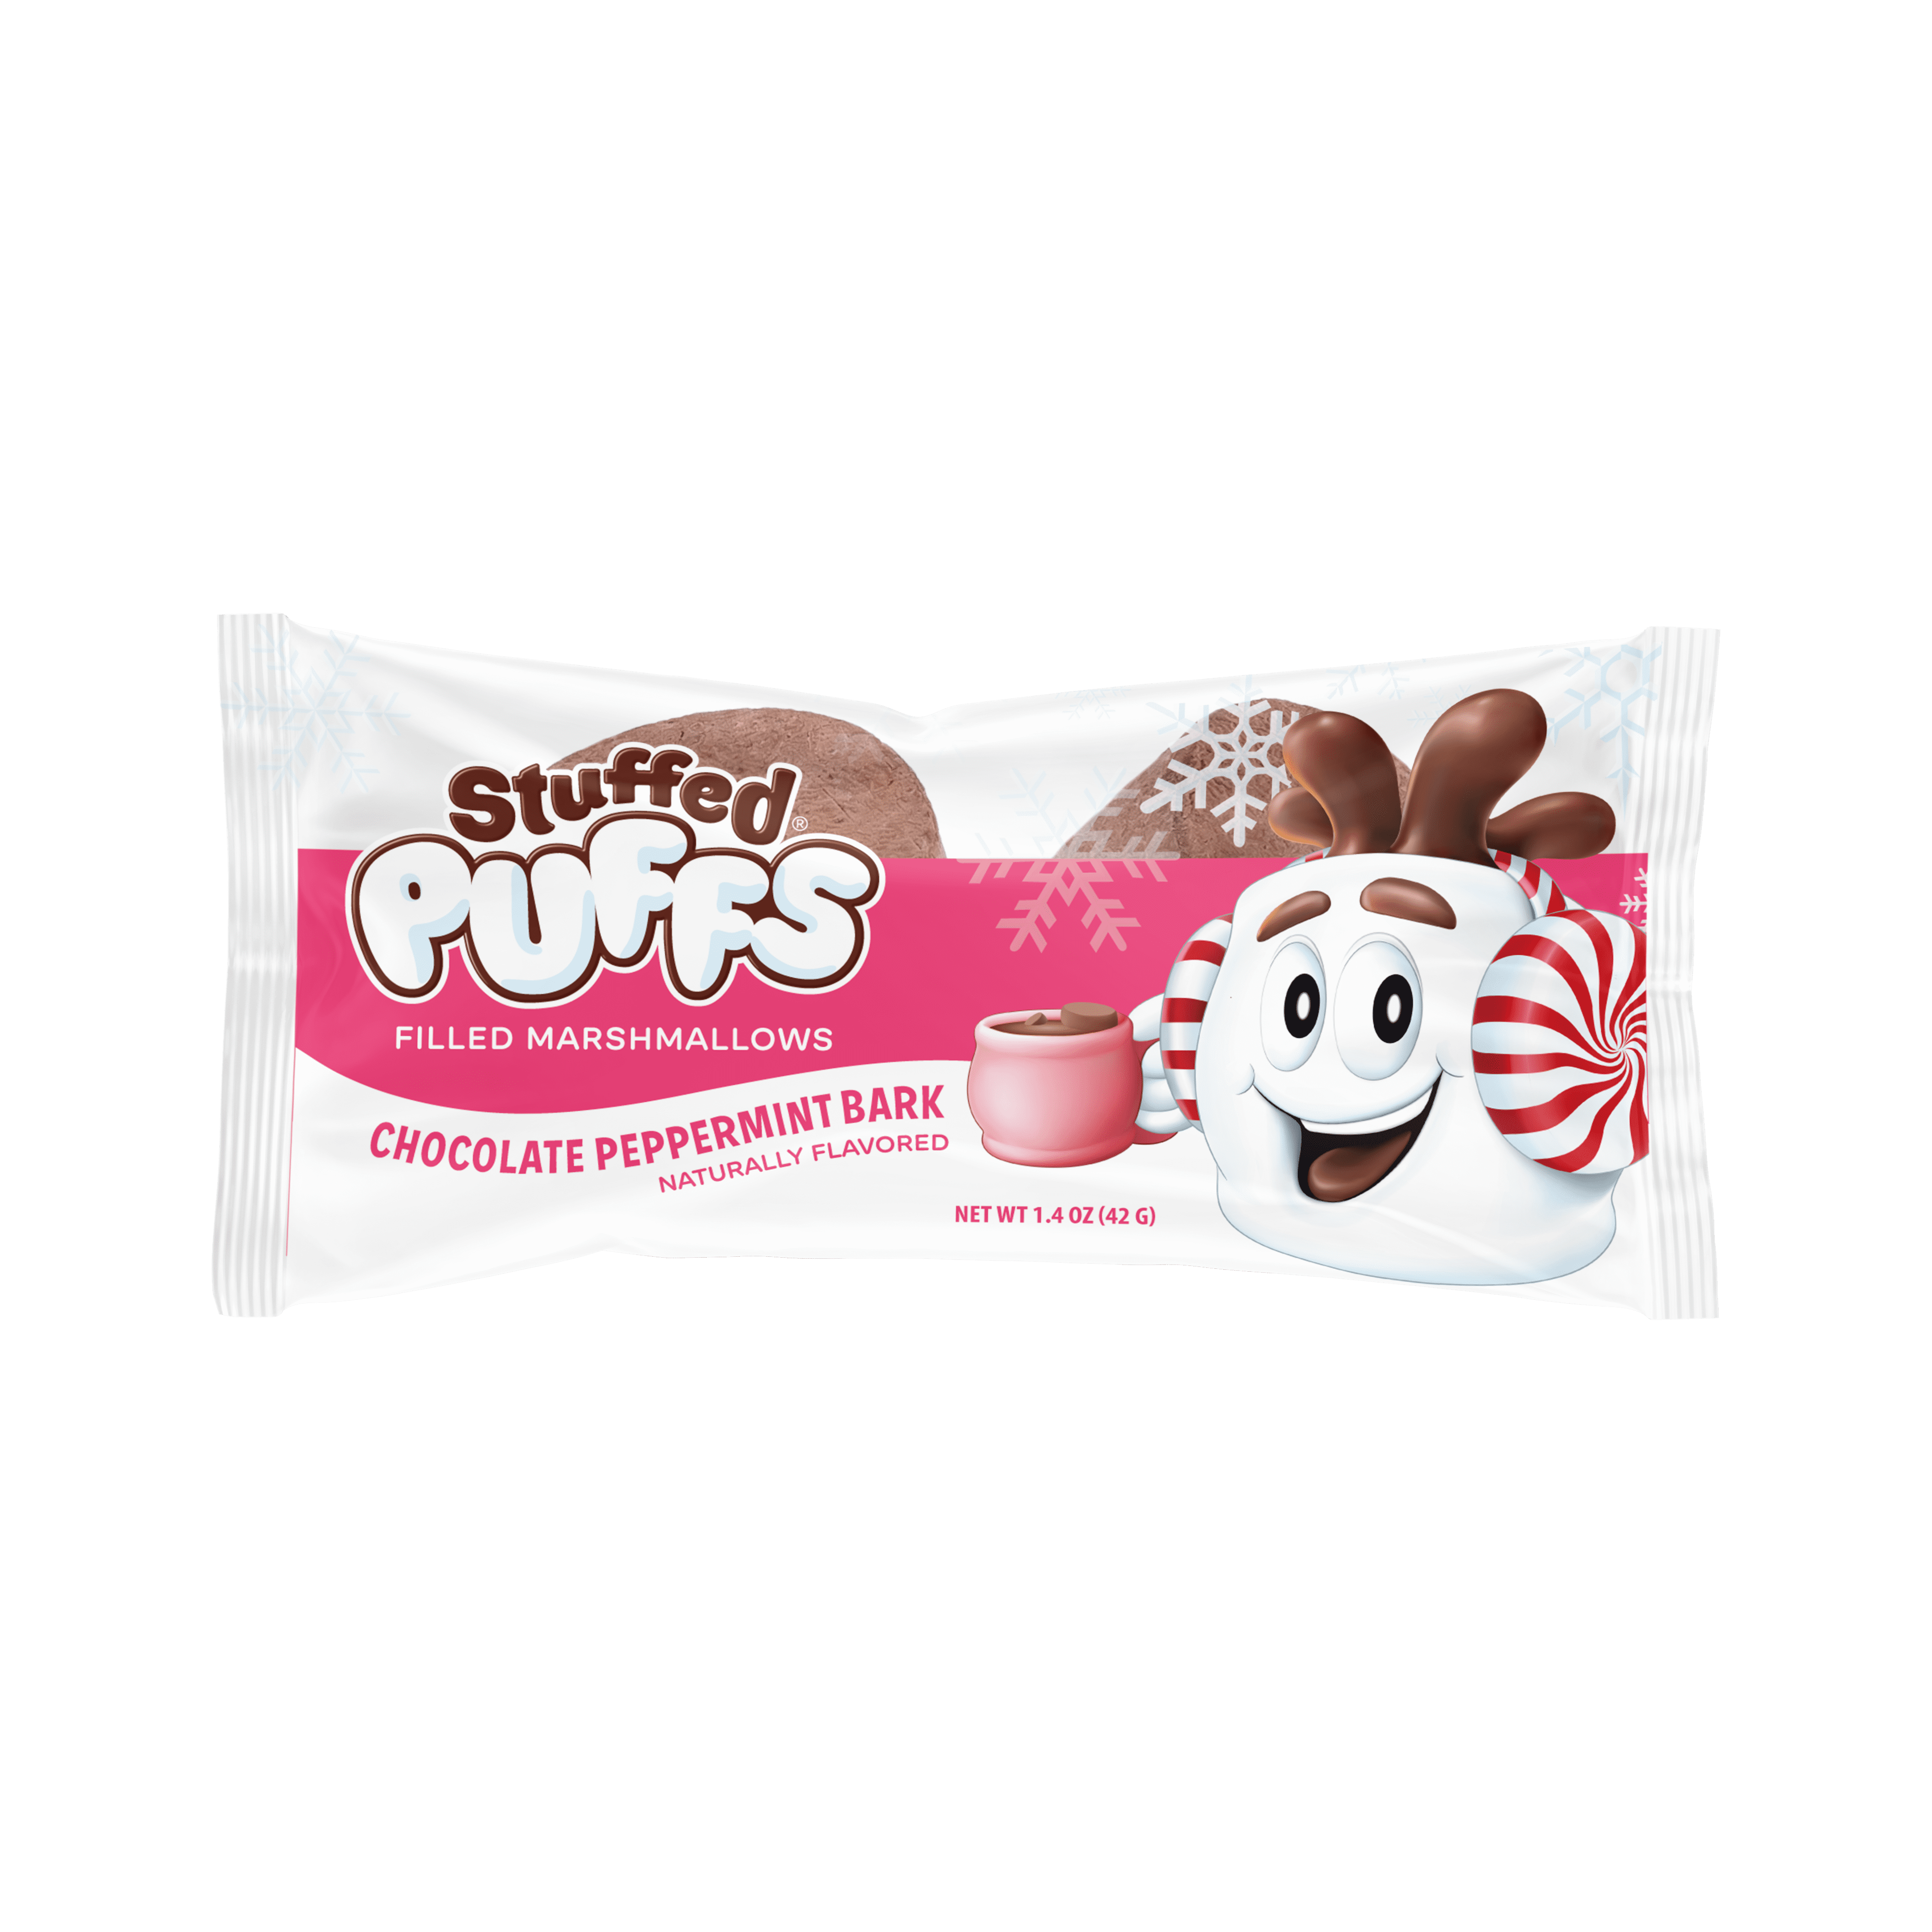 Stuffed Puffs ® Filled Marshmallows Chocolate Peppermint Bark Holiday Hot Cocoa 2pk, NET WT 1.4oz